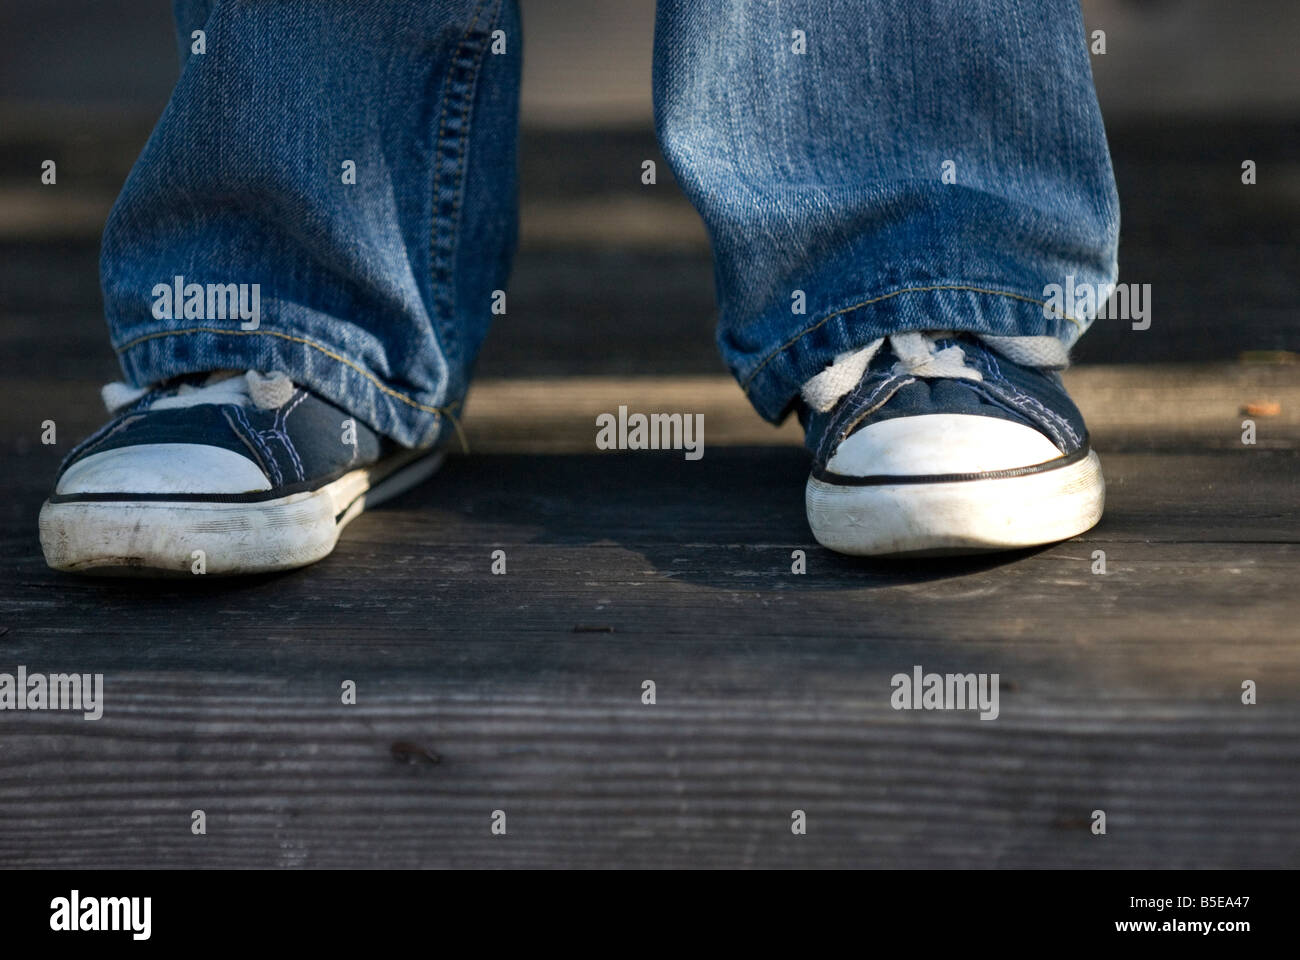 Boy's feet in tennis shoes. Sneakers. Stock Photo